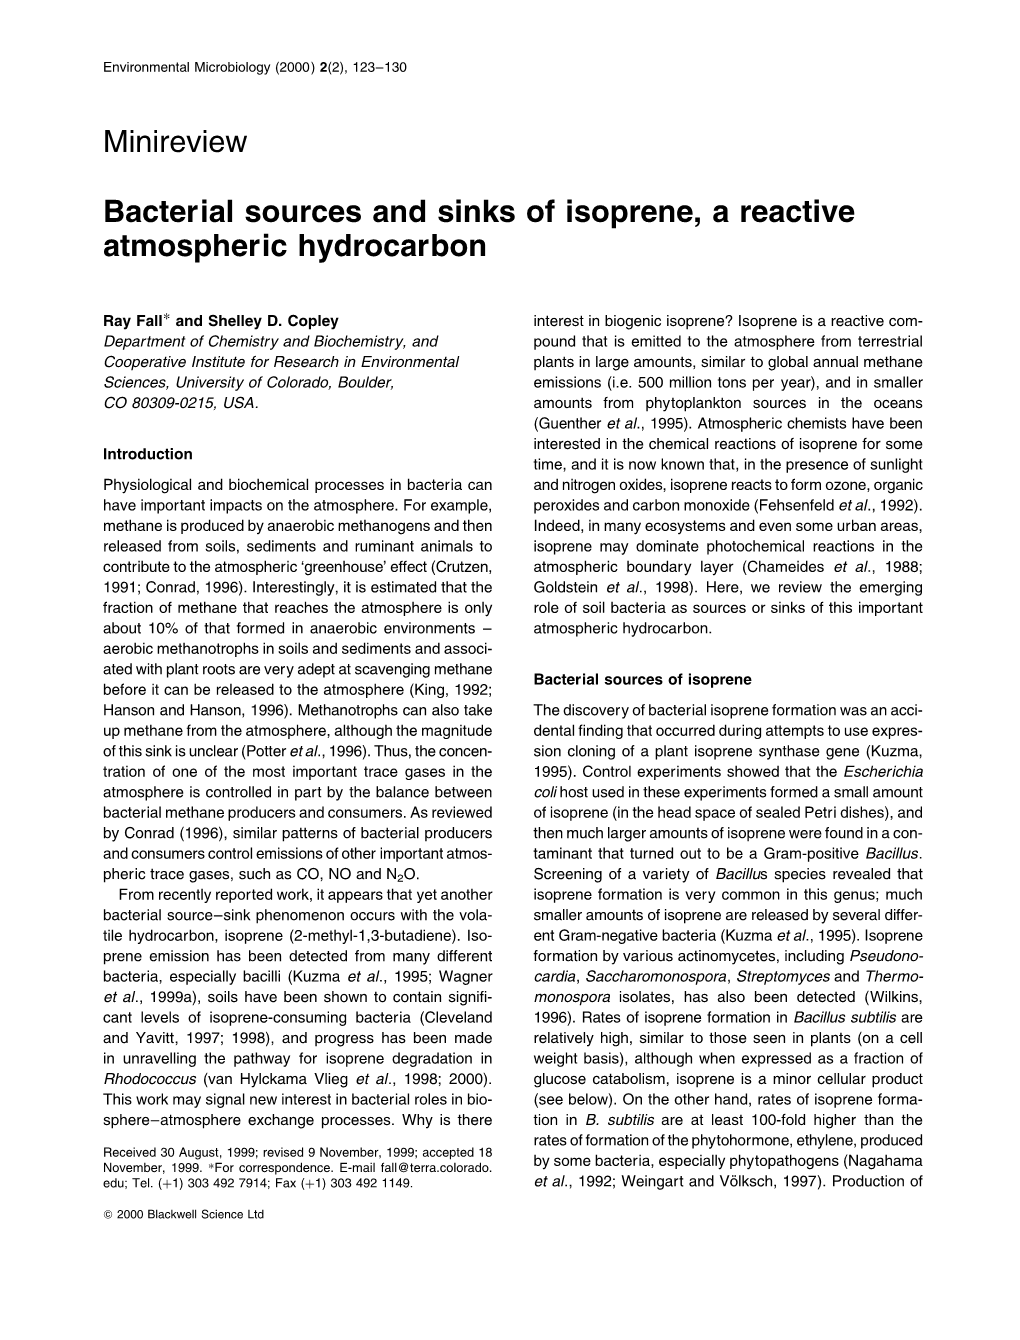 Bacterial Sources and Sinks of Isoprene, a Reactive Atmospheric Hydrocarbon